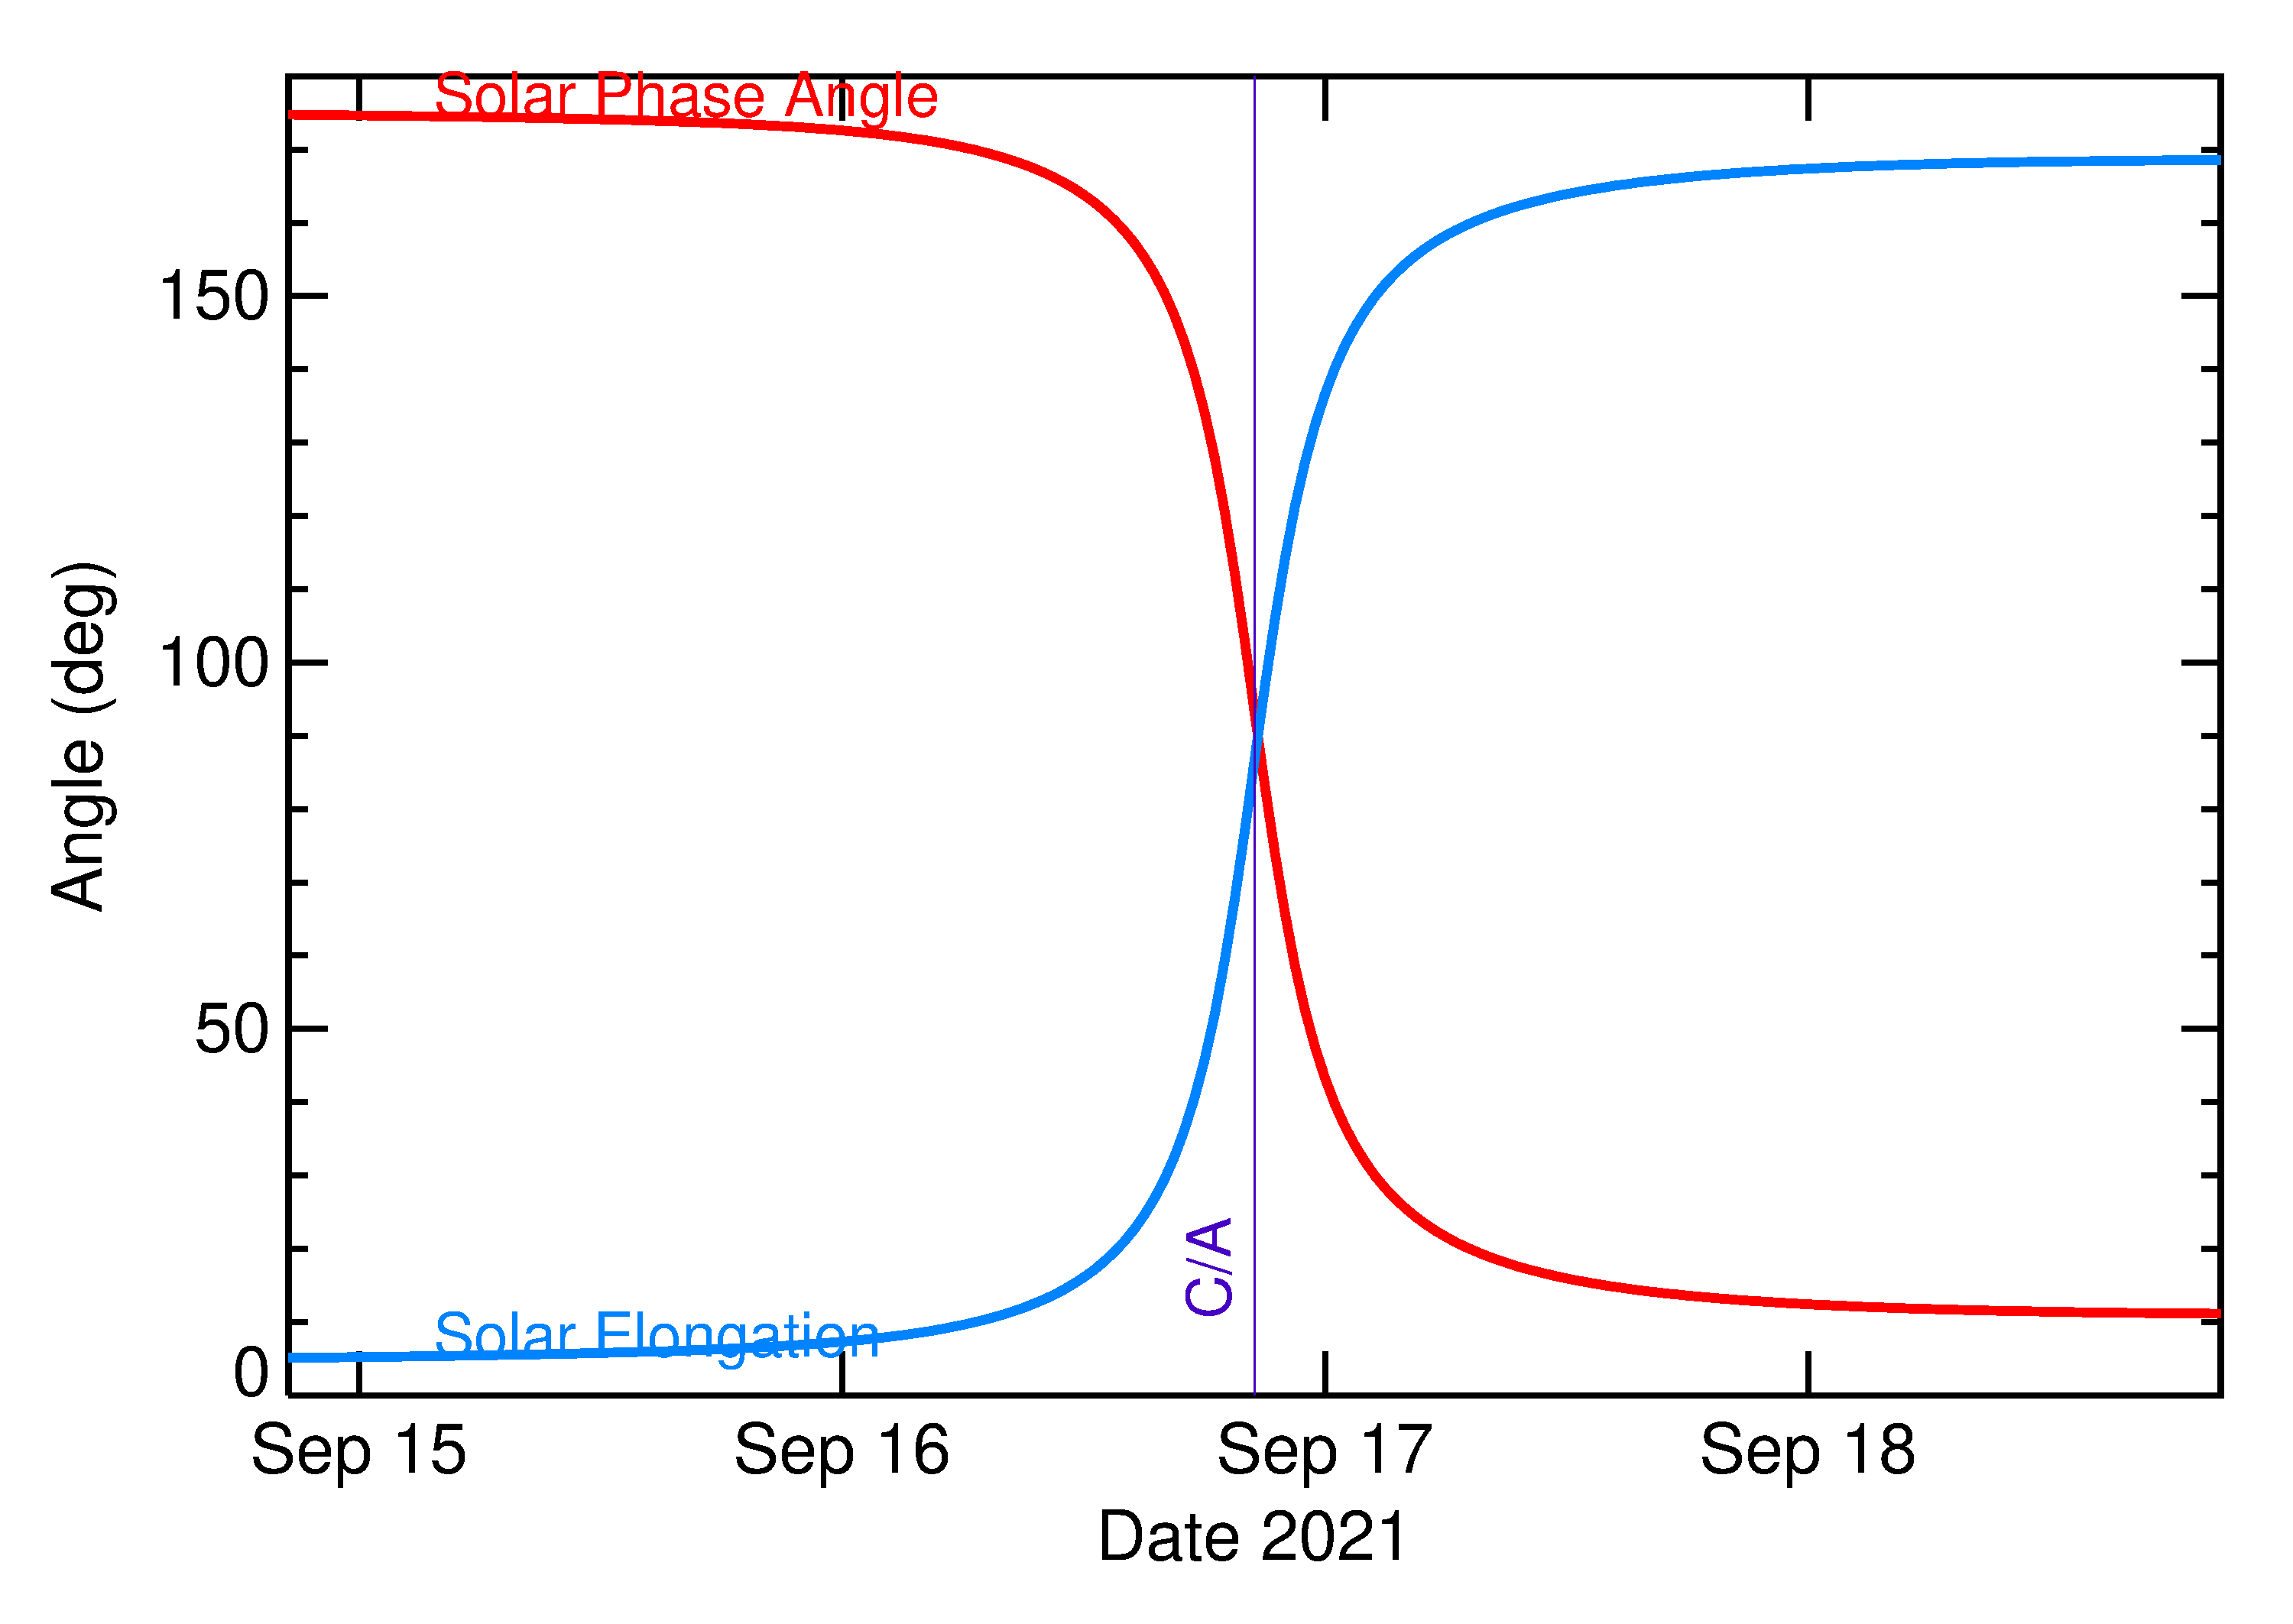 Solar Elongation and Solar Phase Angle of 2021 SG in the days around closest approach